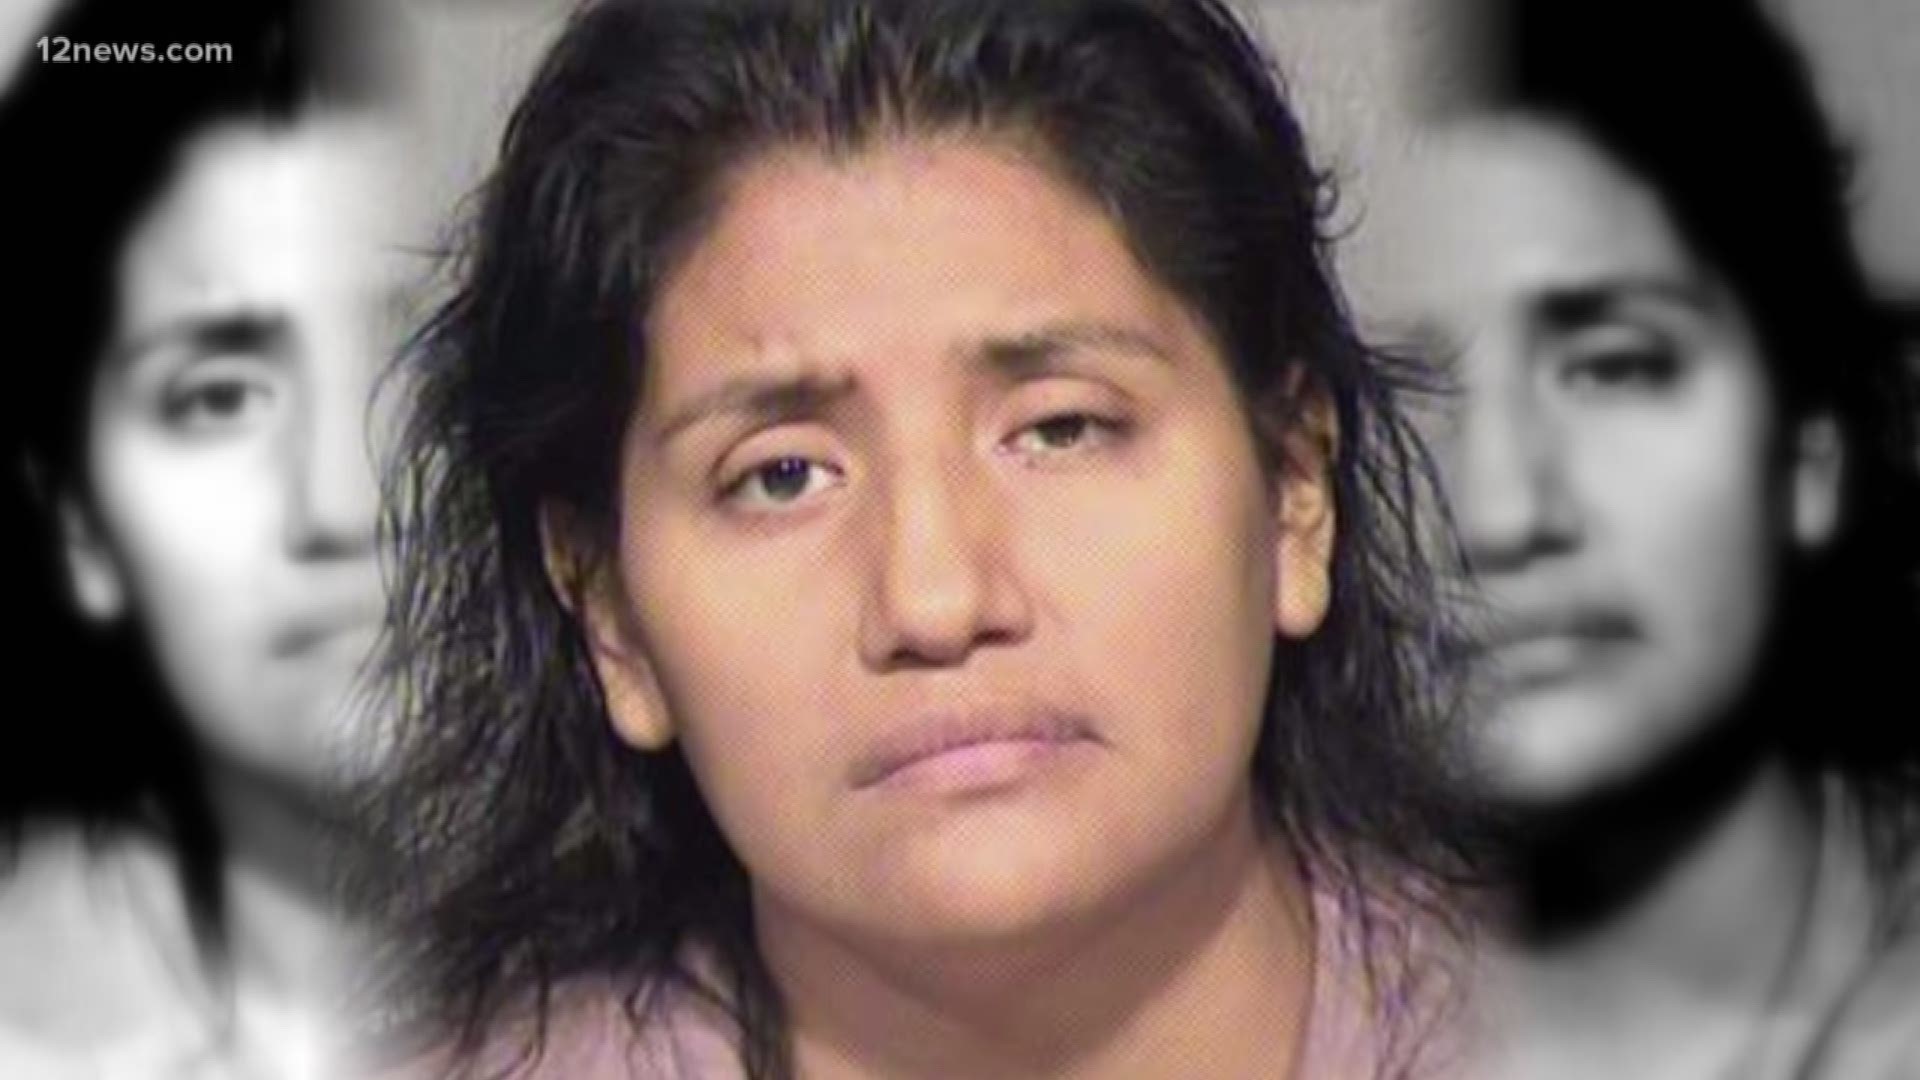 A woman running a daycare from her home is accused of abusing not one, but two children. Jaquelin Cantor is accused of abusing one child in November of last year, and another child in February.